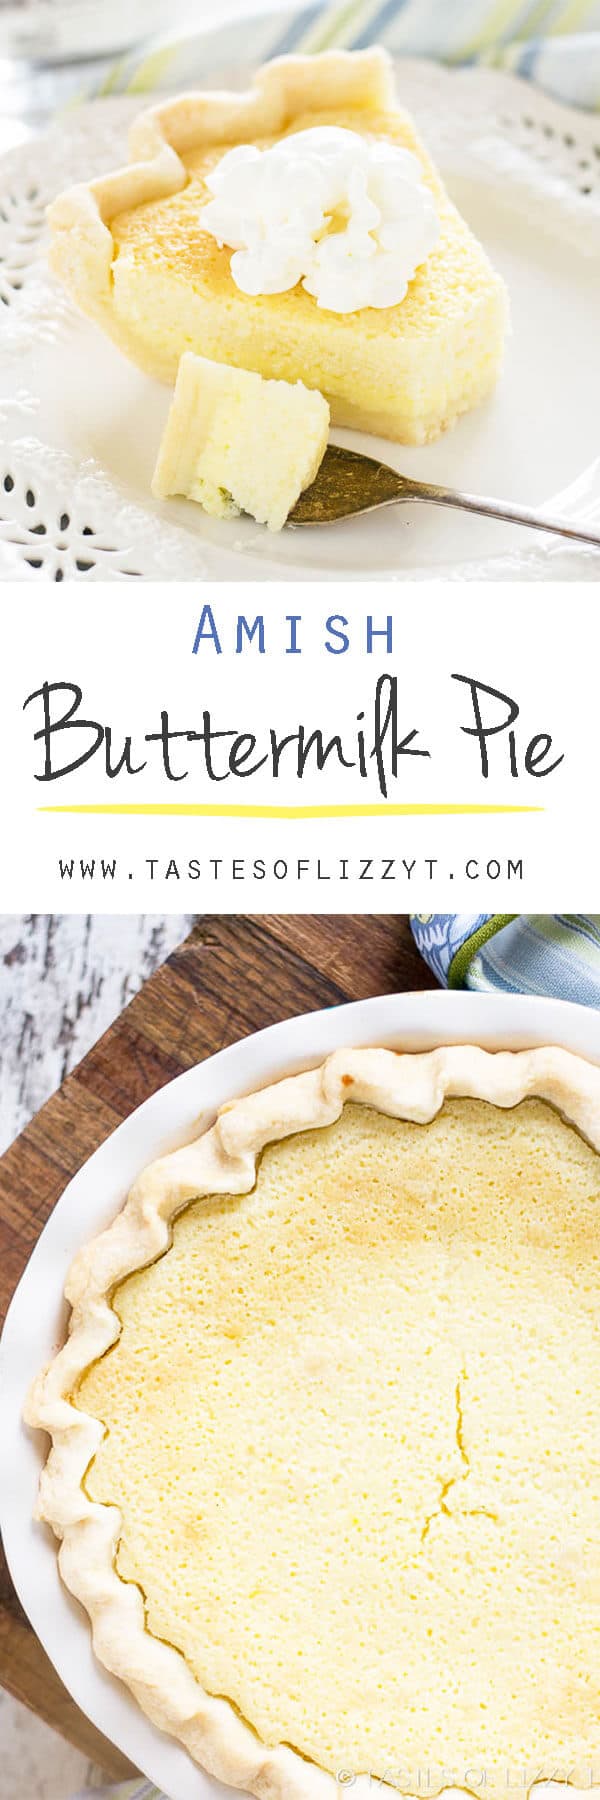 What is a recipe for Amish butterscotch pie?